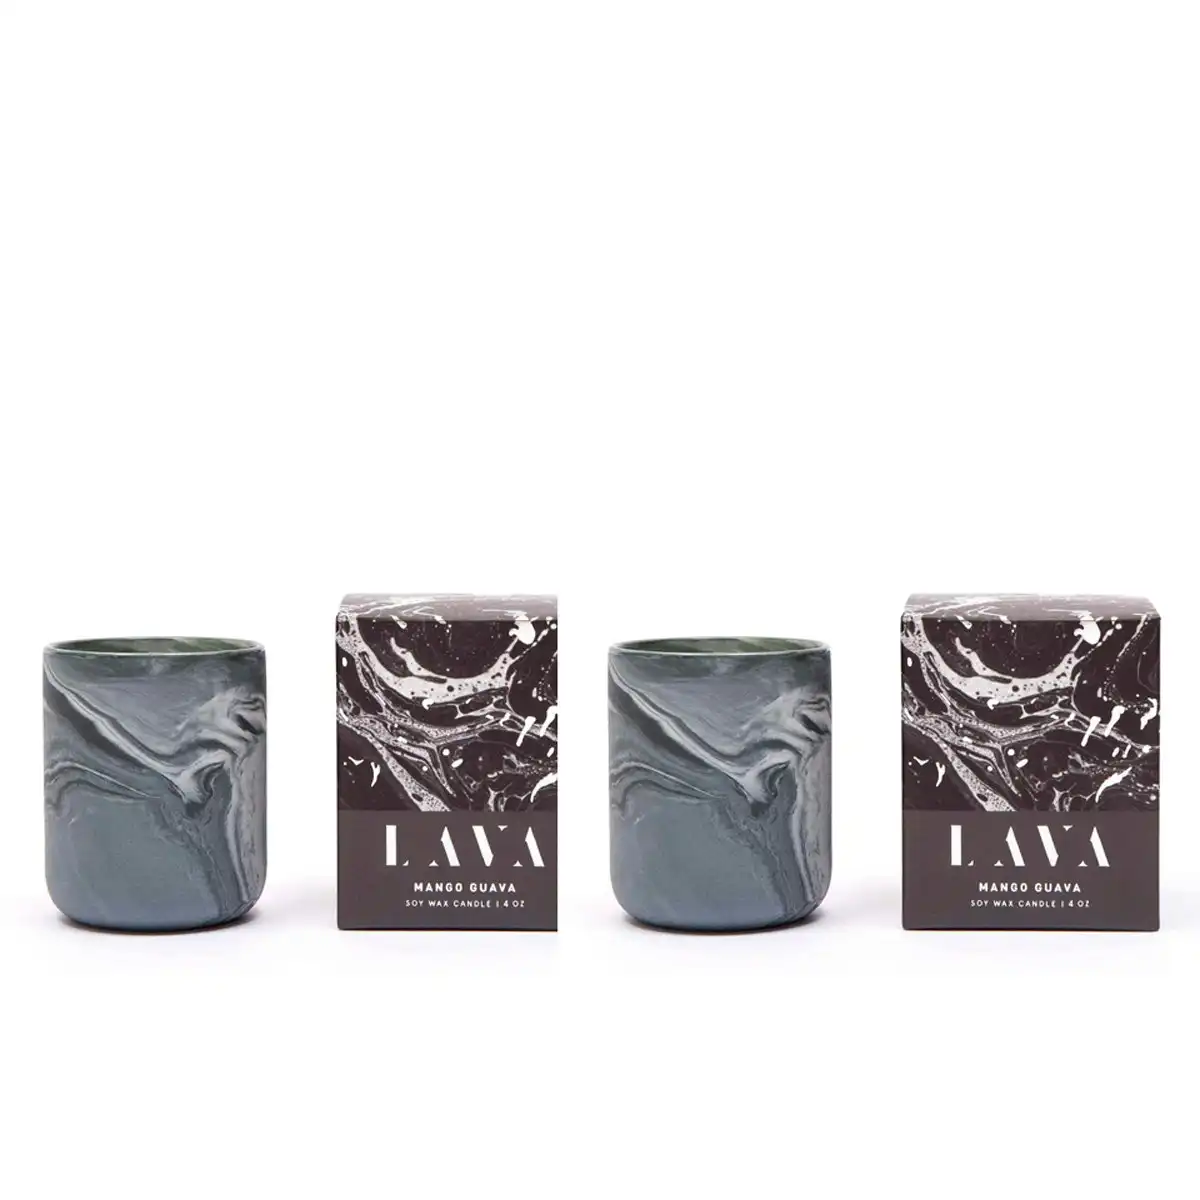 2x Serenity Lava 130g Small Scented Soy Wax Candle Home Fragrance Mango Guava